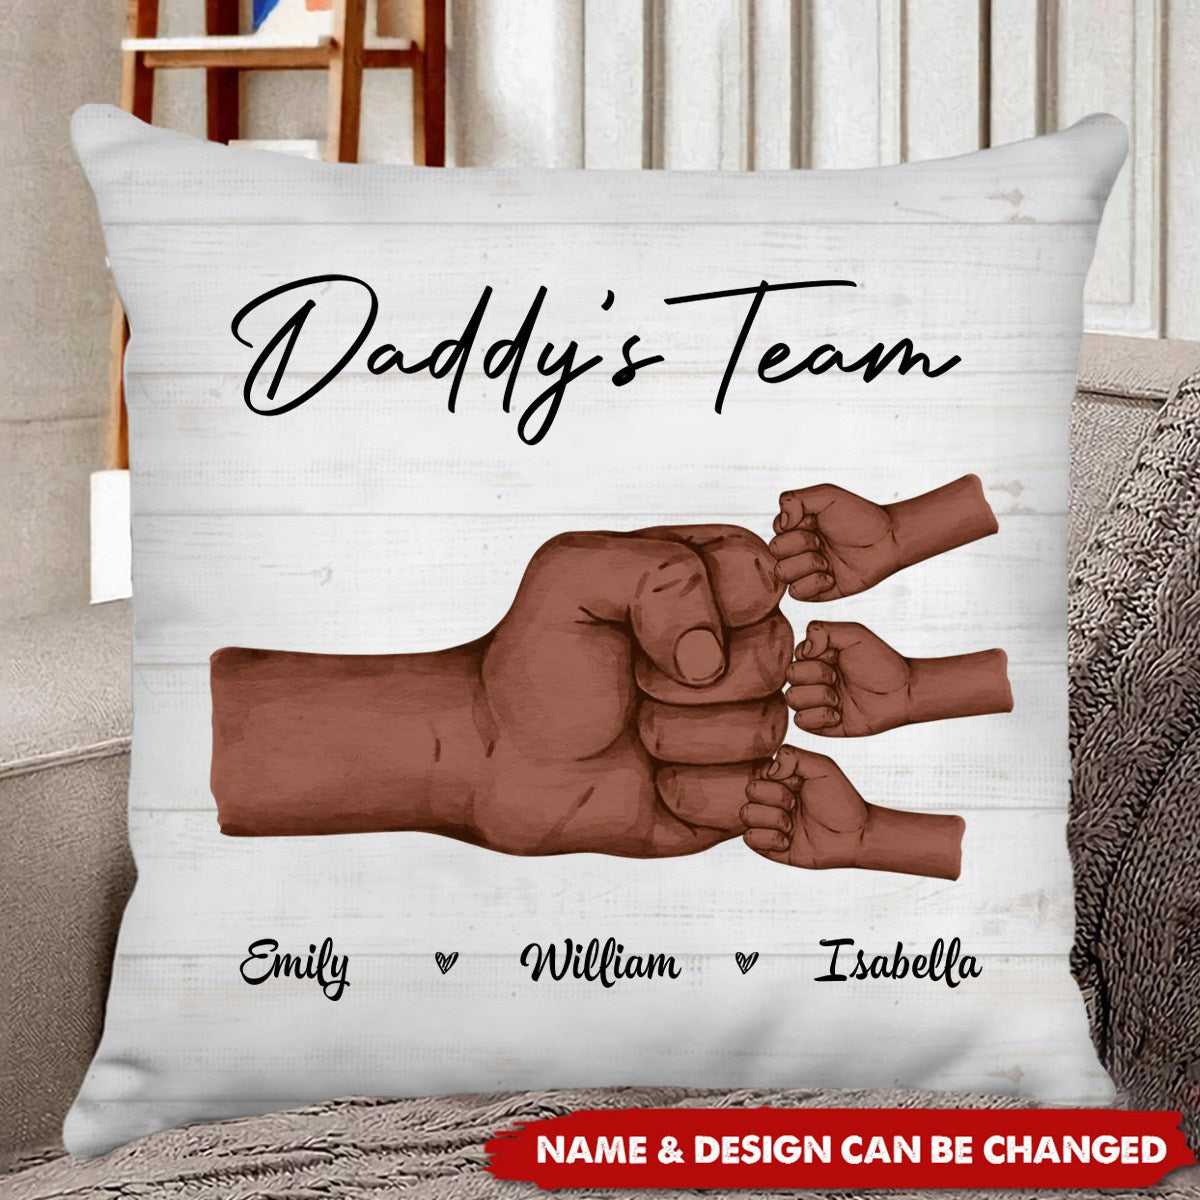 Mother Or Daddy & Kids, Together We're A Team - Personalized Pillow - Father's Day Gift, Mother's Day